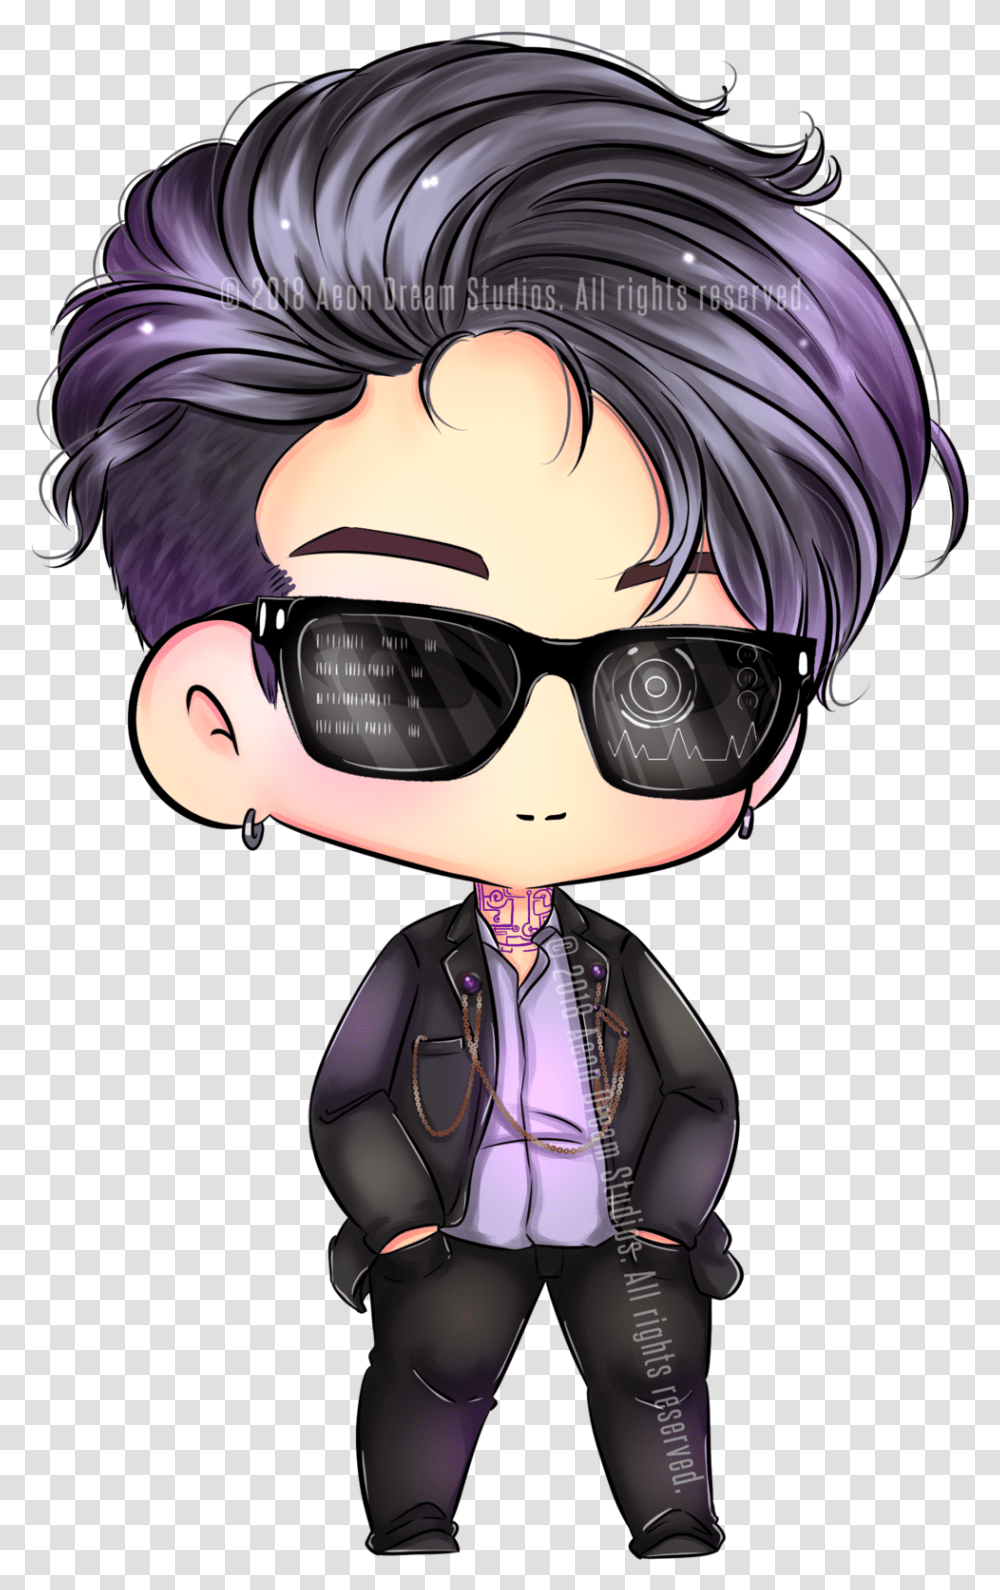 Bts To The Edge Of The Sky Chibi, Sunglasses, Accessories, Accessory, Comics Transparent Png